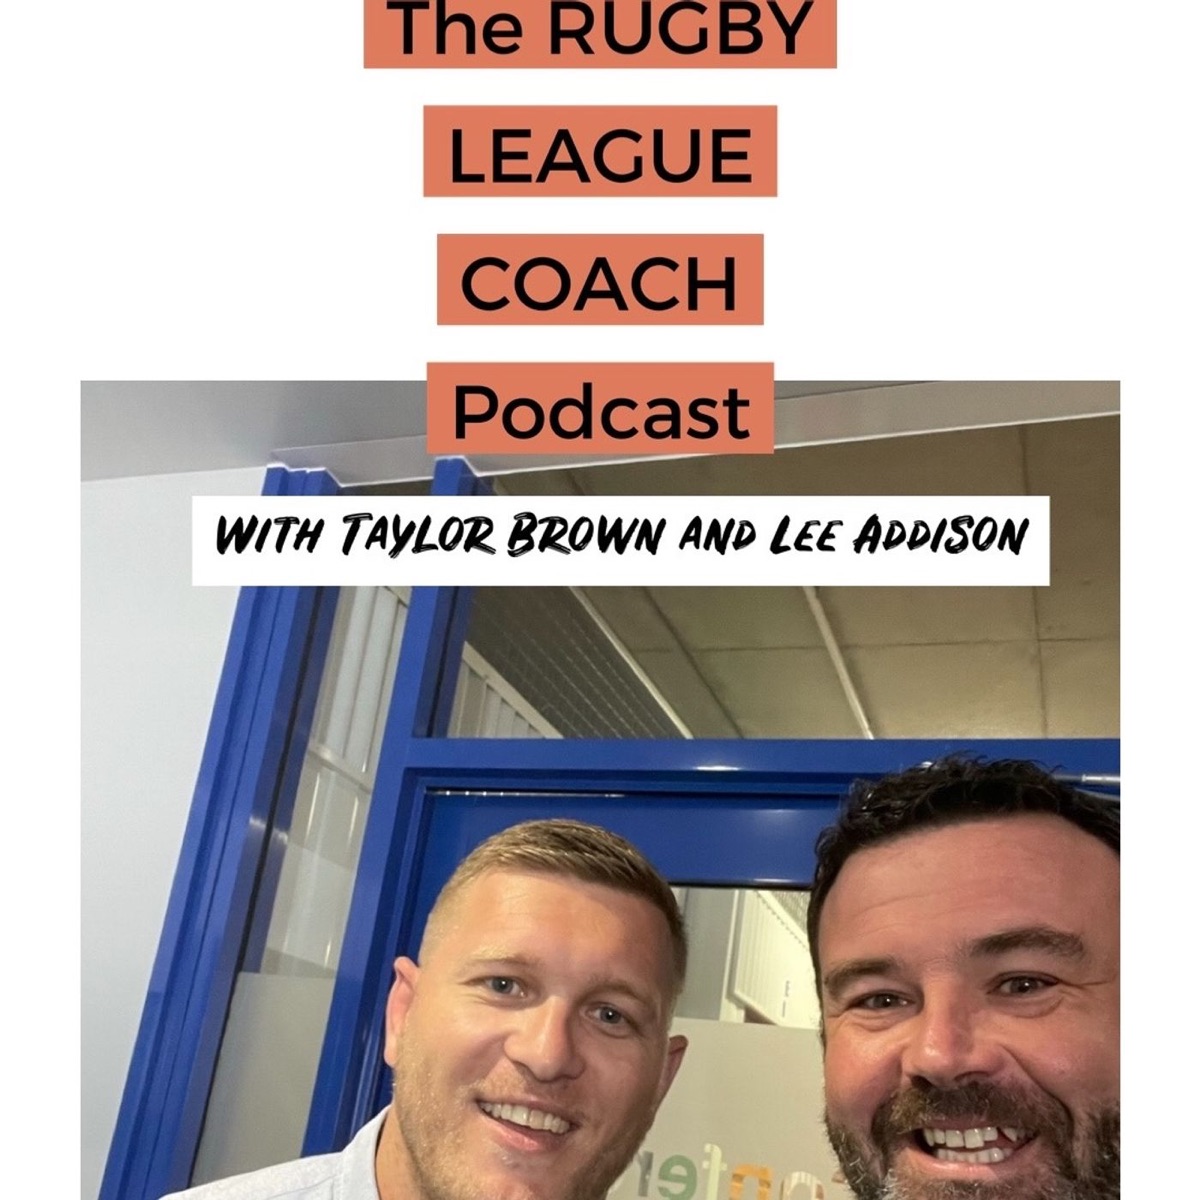 The RUGBY LEAGUE COACH Podcast – Australian Podcasts